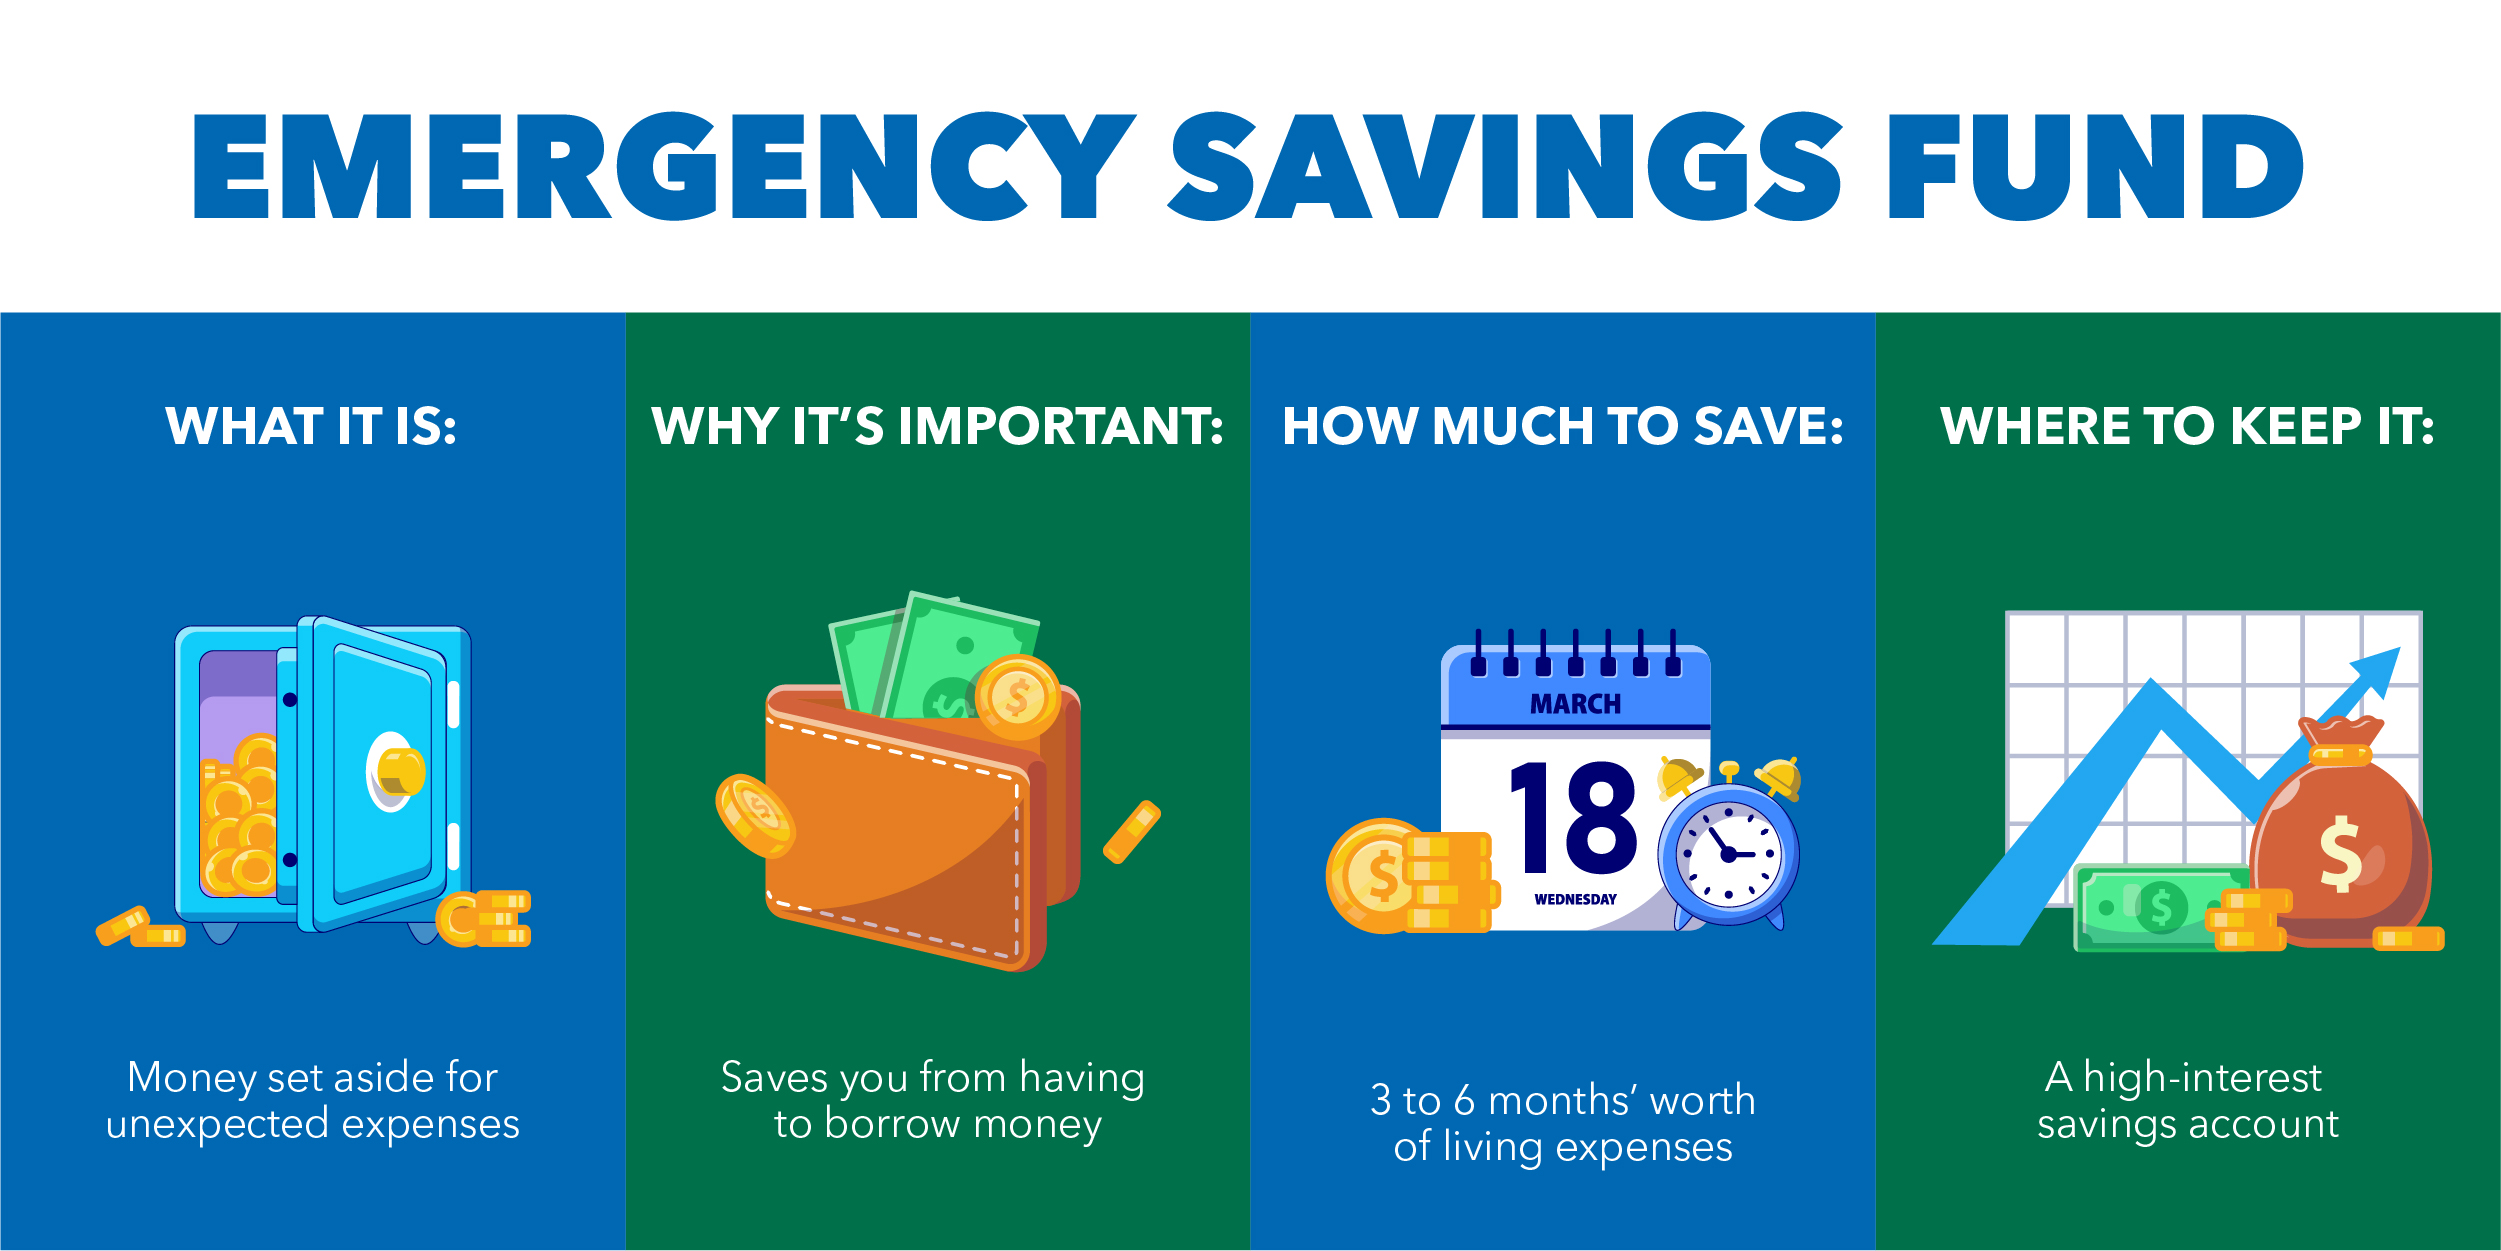 Emergency Fund Savings: What it is - Money set aside for unexpected expenses - Why It's Important - saves you from having to borrow money - How Much to Save - 3 to 6 months' worth of living expenses - Where to Keep it - A high interest savings account